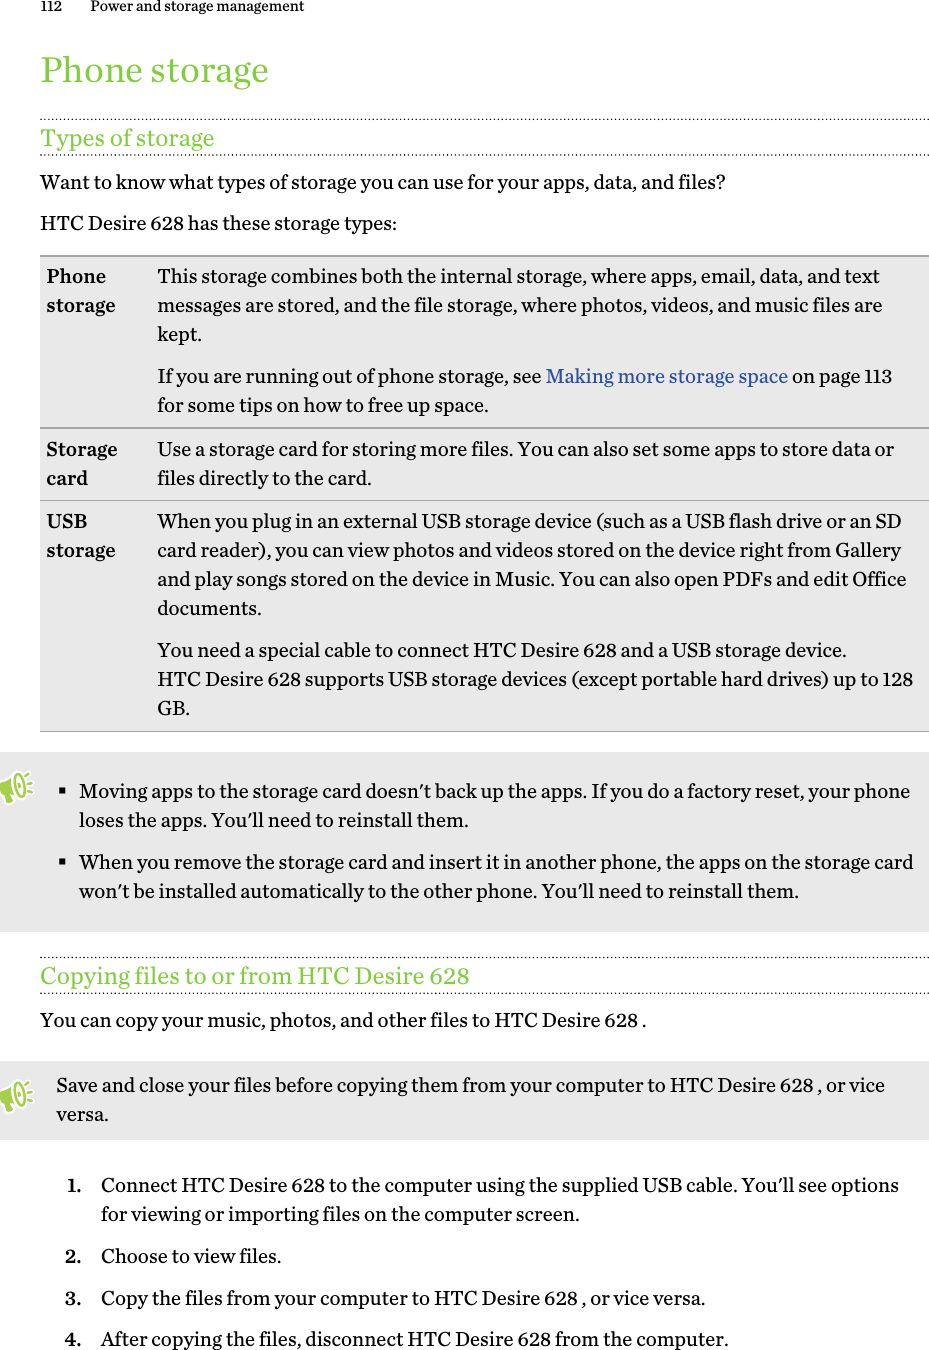 Phone storageTypes of storageWant to know what types of storage you can use for your apps, data, and files?HTC Desire 628 has these storage types:Phonestorage This storage combines both the internal storage, where apps, email, data, and textmessages are stored, and the file storage, where photos, videos, and music files arekept.If you are running out of phone storage, see Making more storage space on page 113for some tips on how to free up space.Storagecard Use a storage card for storing more files. You can also set some apps to store data orfiles directly to the card.USBstorage When you plug in an external USB storage device (such as a USB flash drive or an SDcard reader), you can view photos and videos stored on the device right from Galleryand play songs stored on the device in Music. You can also open PDFs and edit Officedocuments.You need a special cable to connect HTC Desire 628 and a USB storage device.HTC Desire 628 supports USB storage devices (except portable hard drives) up to 128GB.§Moving apps to the storage card doesn&apos;t back up the apps. If you do a factory reset, your phoneloses the apps. You&apos;ll need to reinstall them.§When you remove the storage card and insert it in another phone, the apps on the storage cardwon&apos;t be installed automatically to the other phone. You&apos;ll need to reinstall them.Copying files to or from HTC Desire 628You can copy your music, photos, and other files to HTC Desire 628 .Save and close your files before copying them from your computer to HTC Desire 628 , or viceversa.1. Connect HTC Desire 628 to the computer using the supplied USB cable. You&apos;ll see optionsfor viewing or importing files on the computer screen.2. Choose to view files.3. Copy the files from your computer to HTC Desire 628 , or vice versa.4. After copying the files, disconnect HTC Desire 628 from the computer.112 Power and storage management